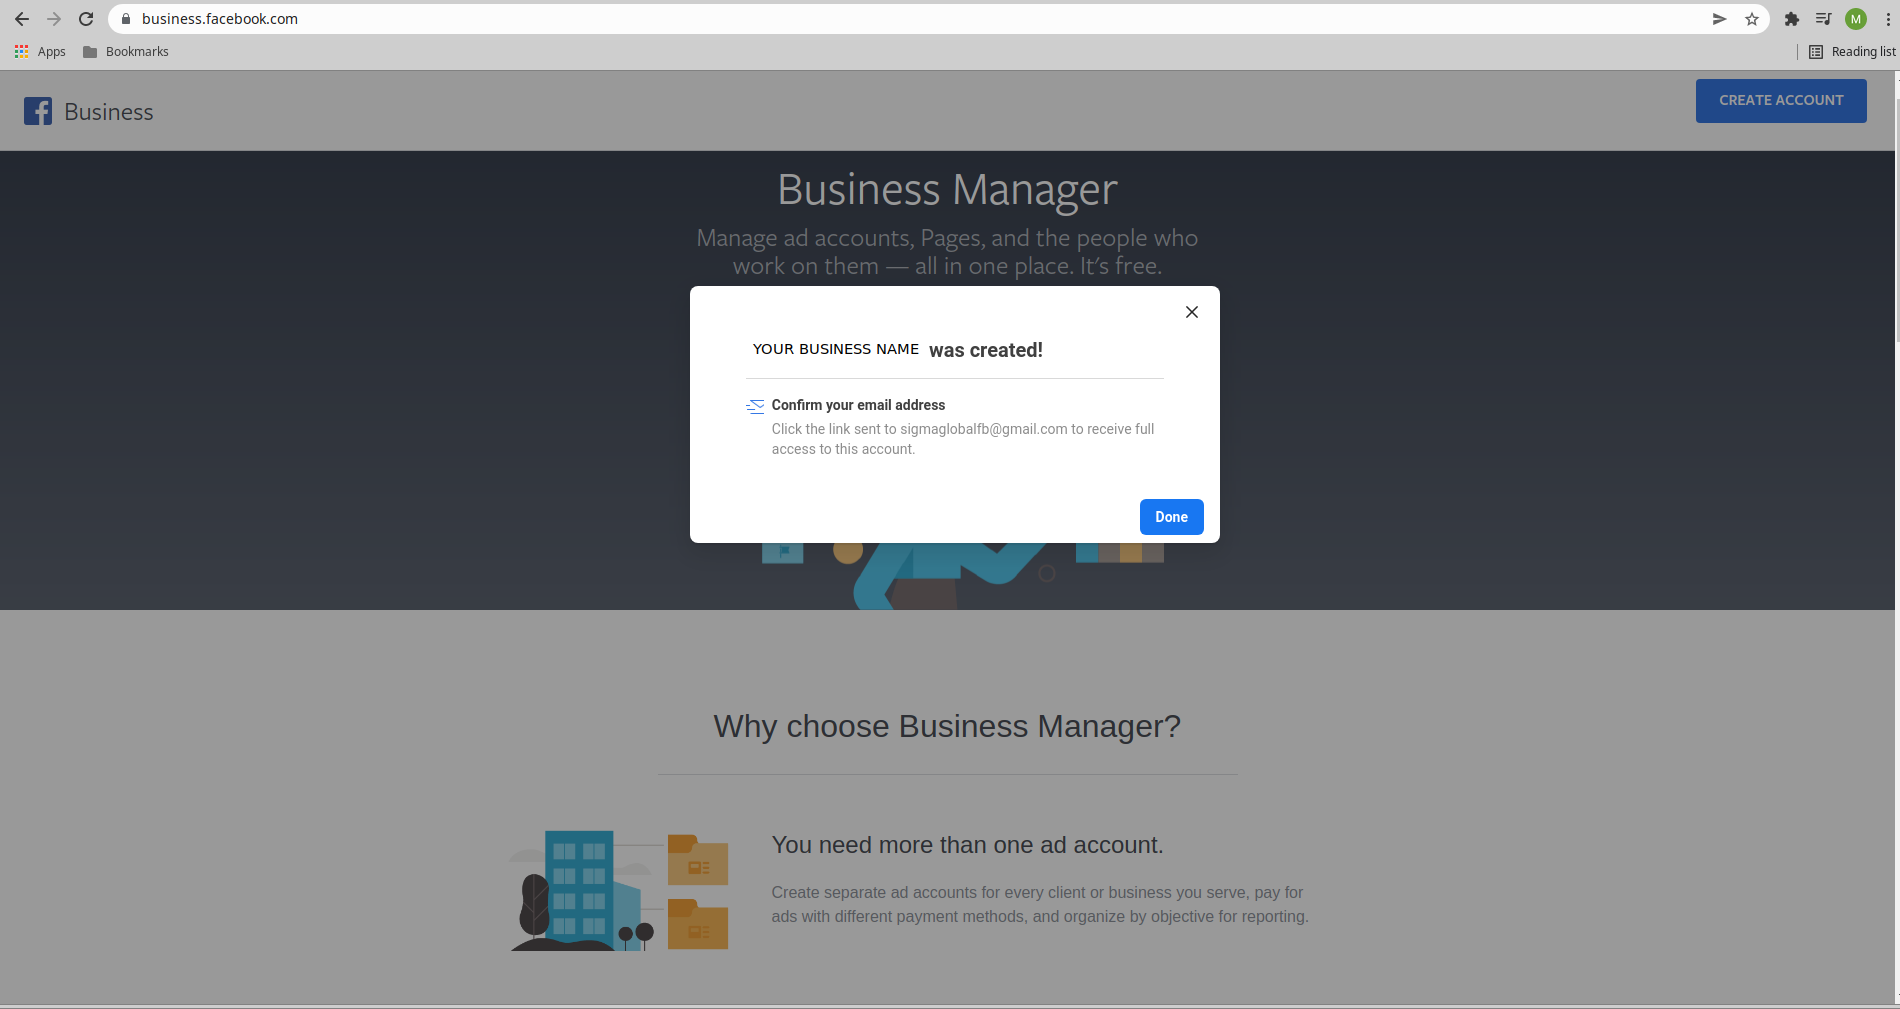 Create Account Facebook Business Manager Account Step 3